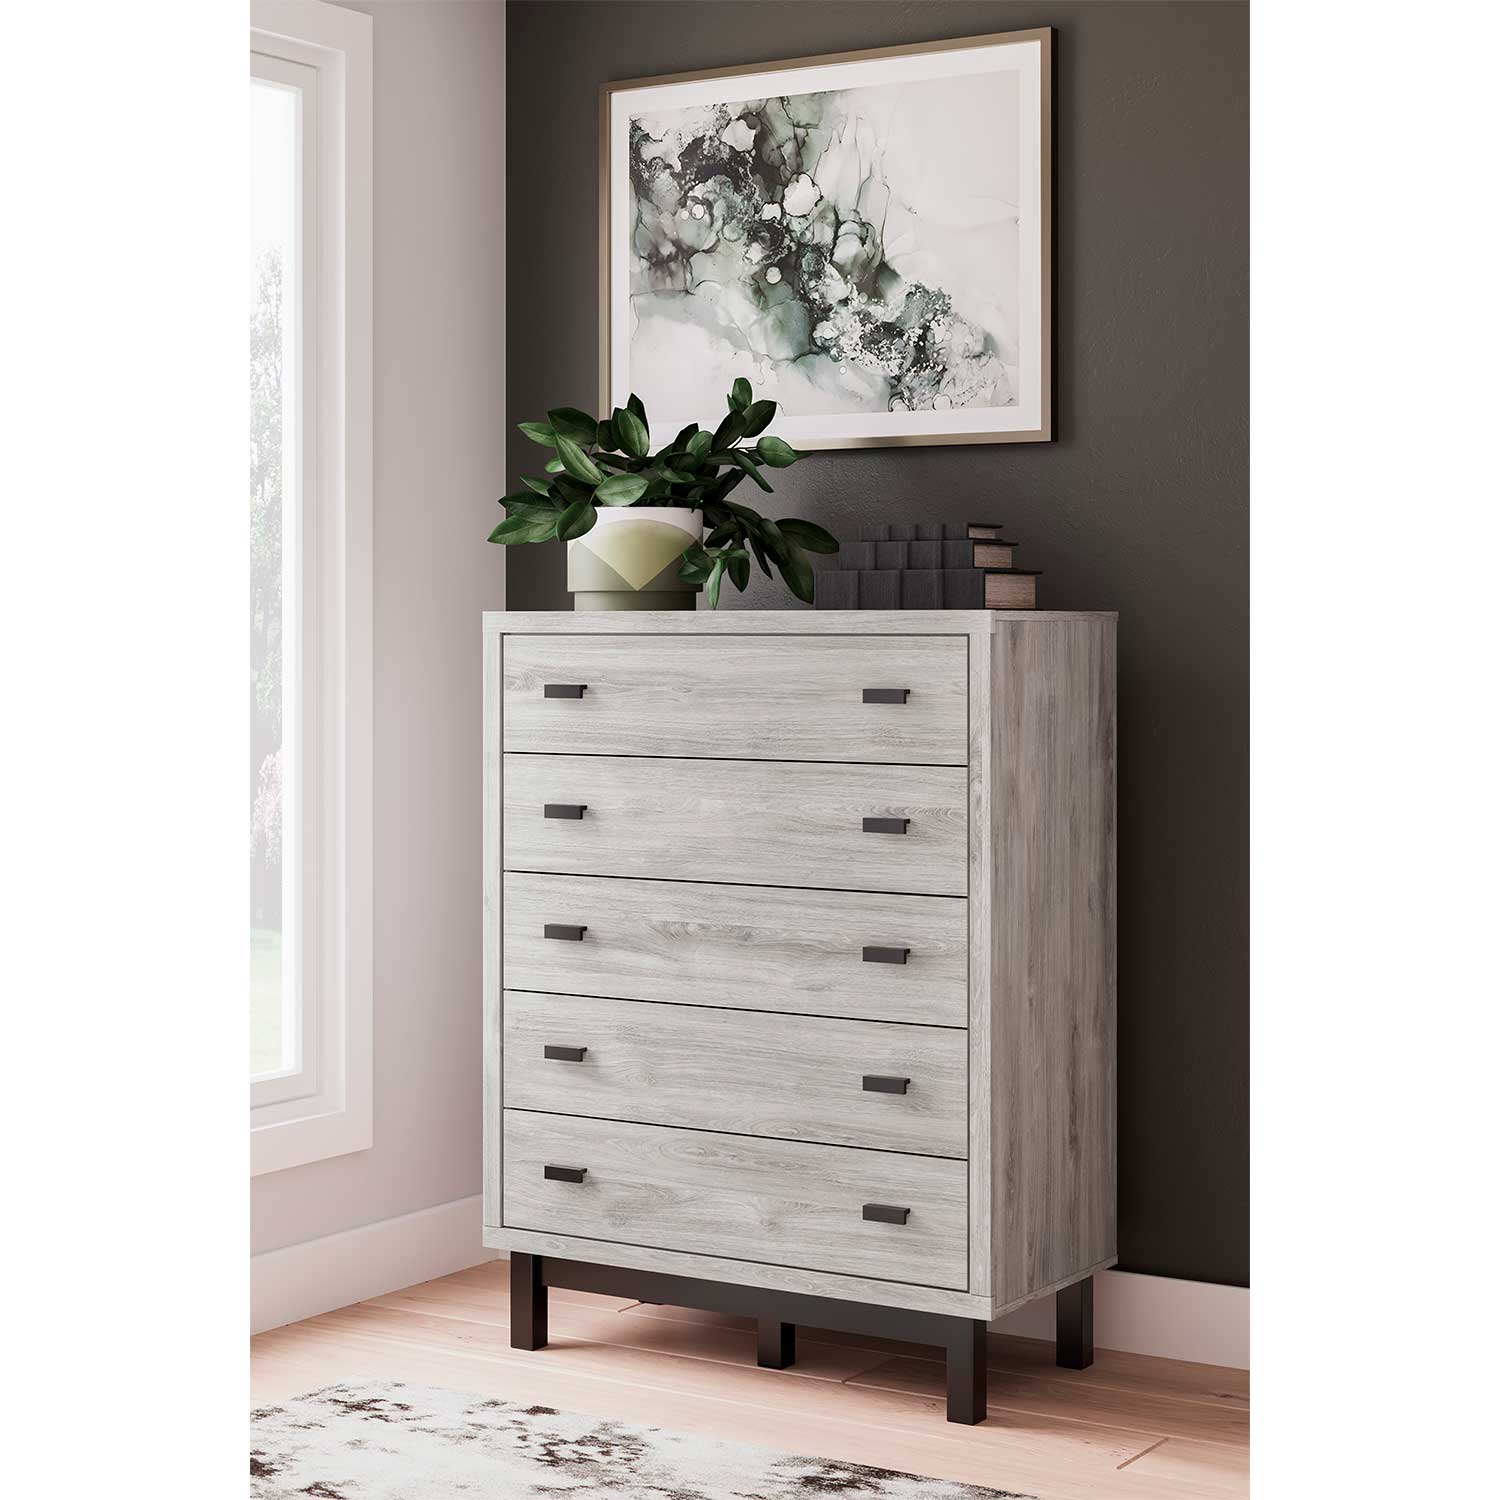 Avelin chest of drawers